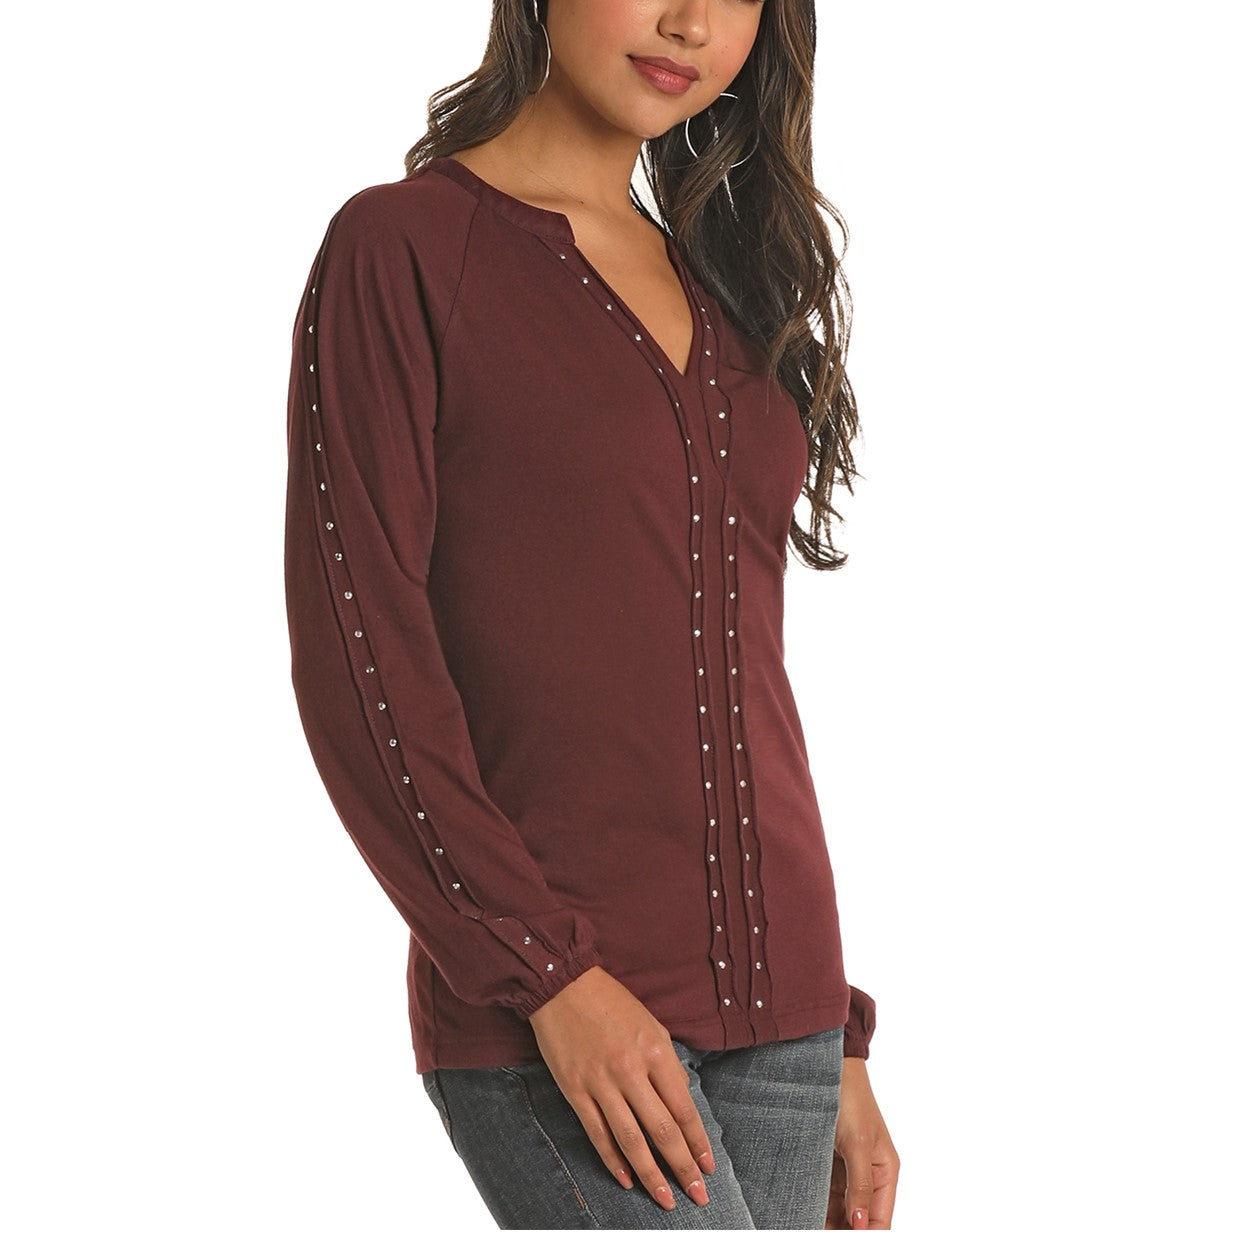 Panhandle Ladies Knit Peasant Maroon With Studs Shirt L8T7216-60